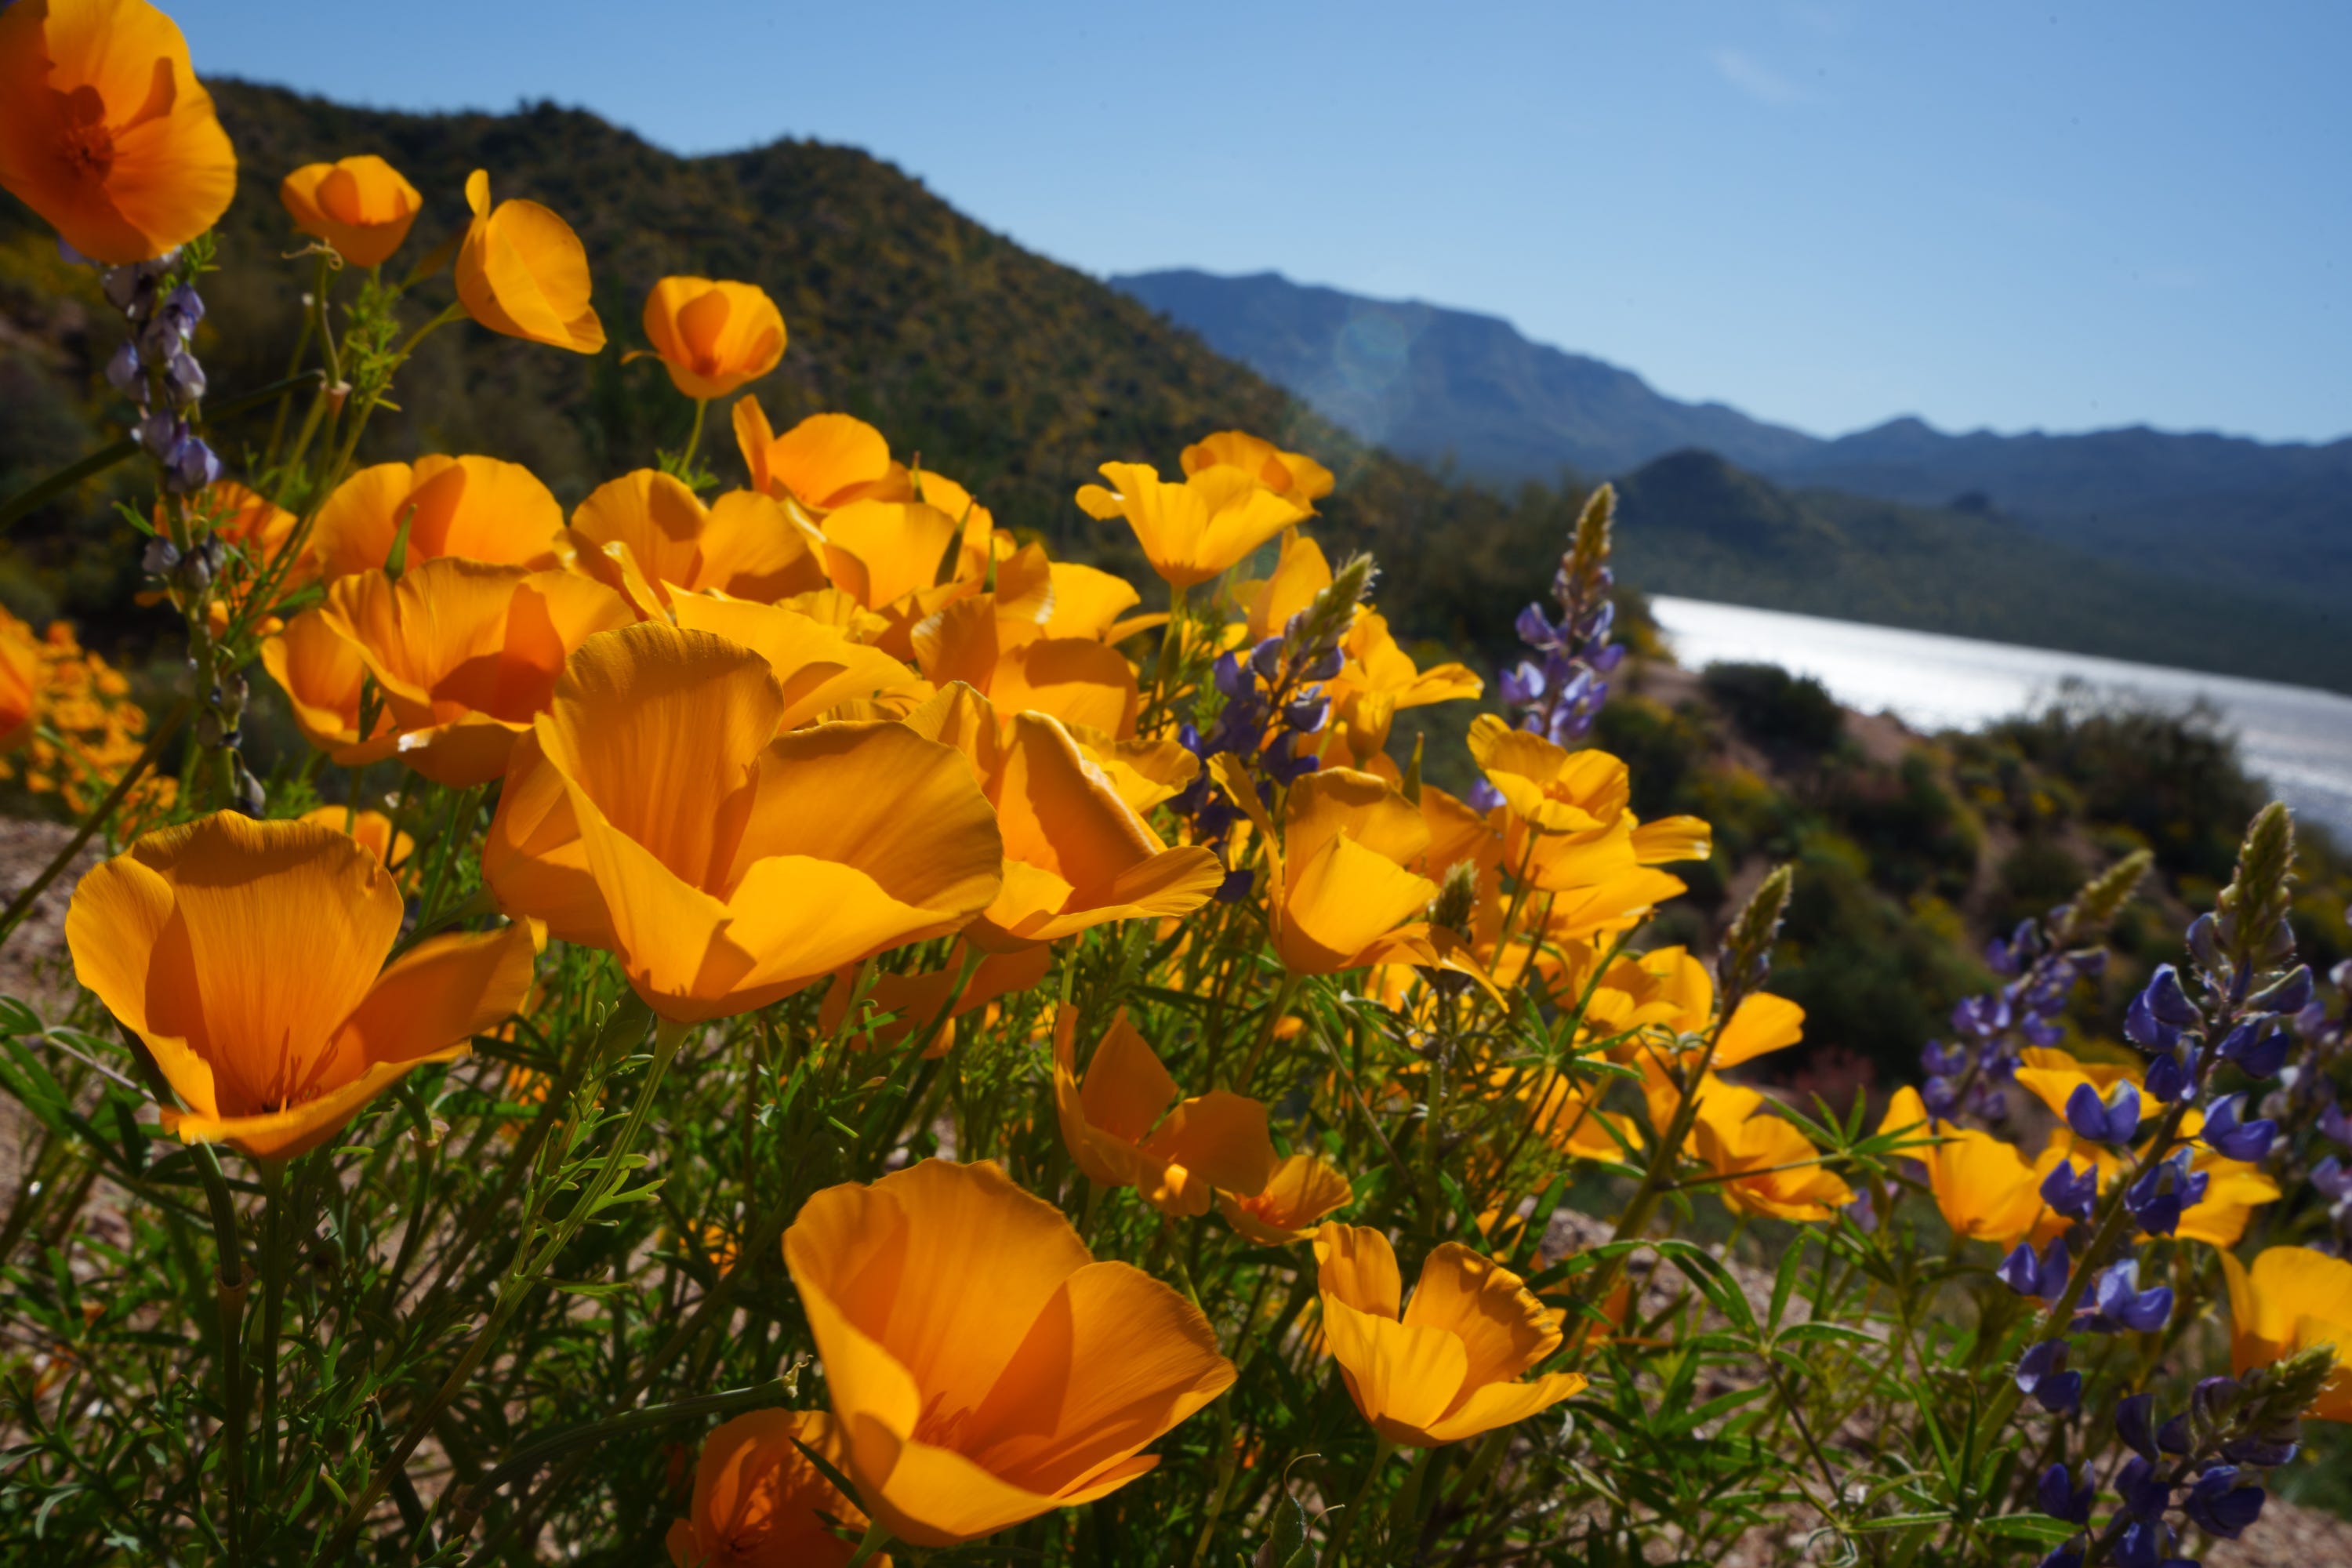 Where to see 'super blooms' of wildflowers in California, Arizona